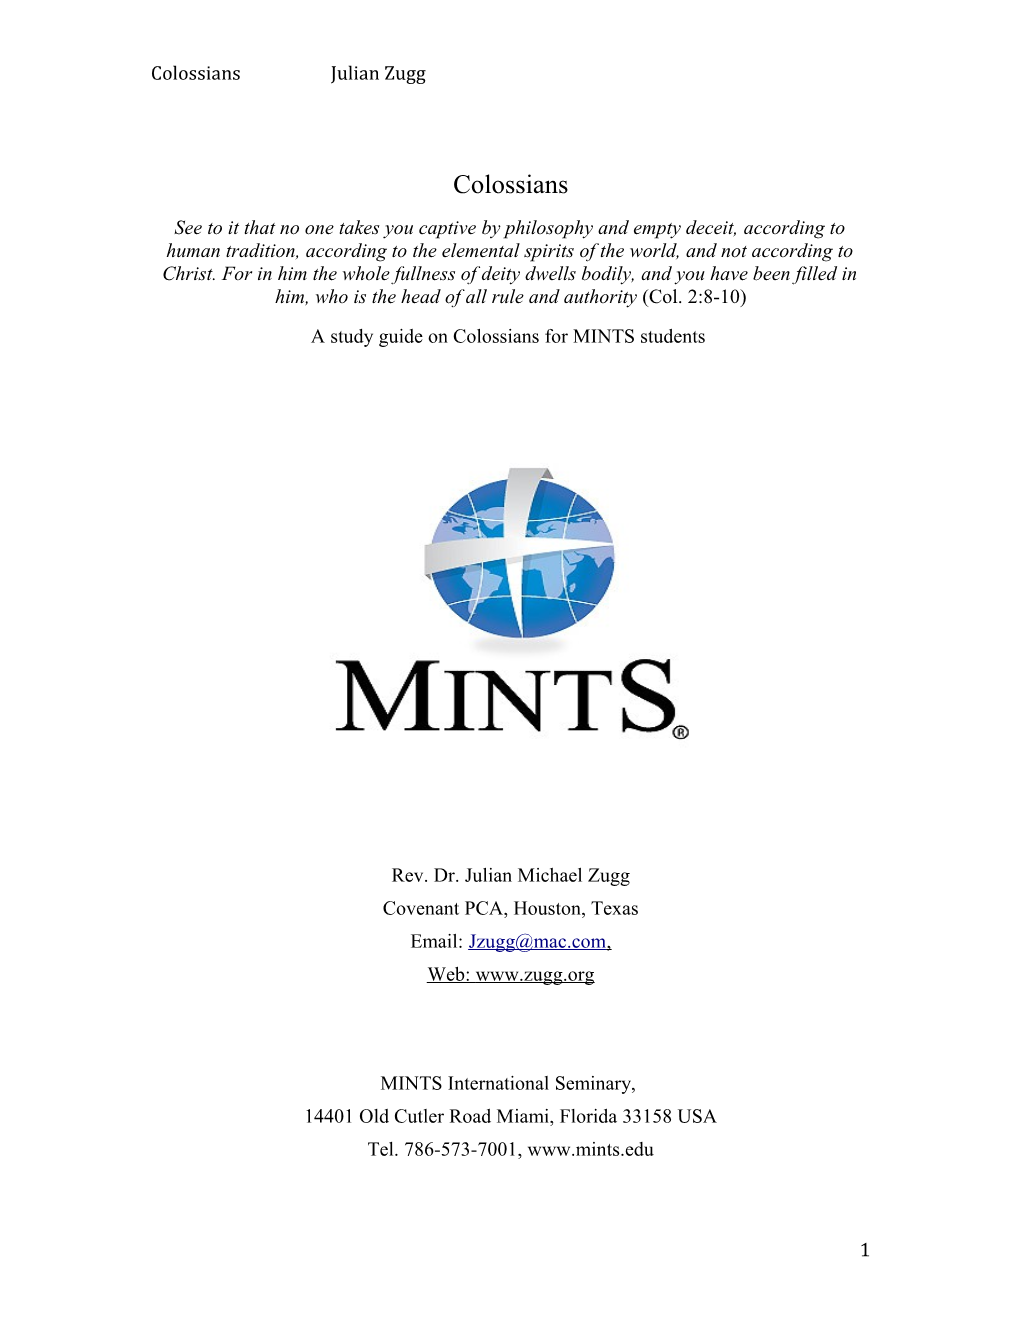 A Study Guide on Colossians for MINTS Students